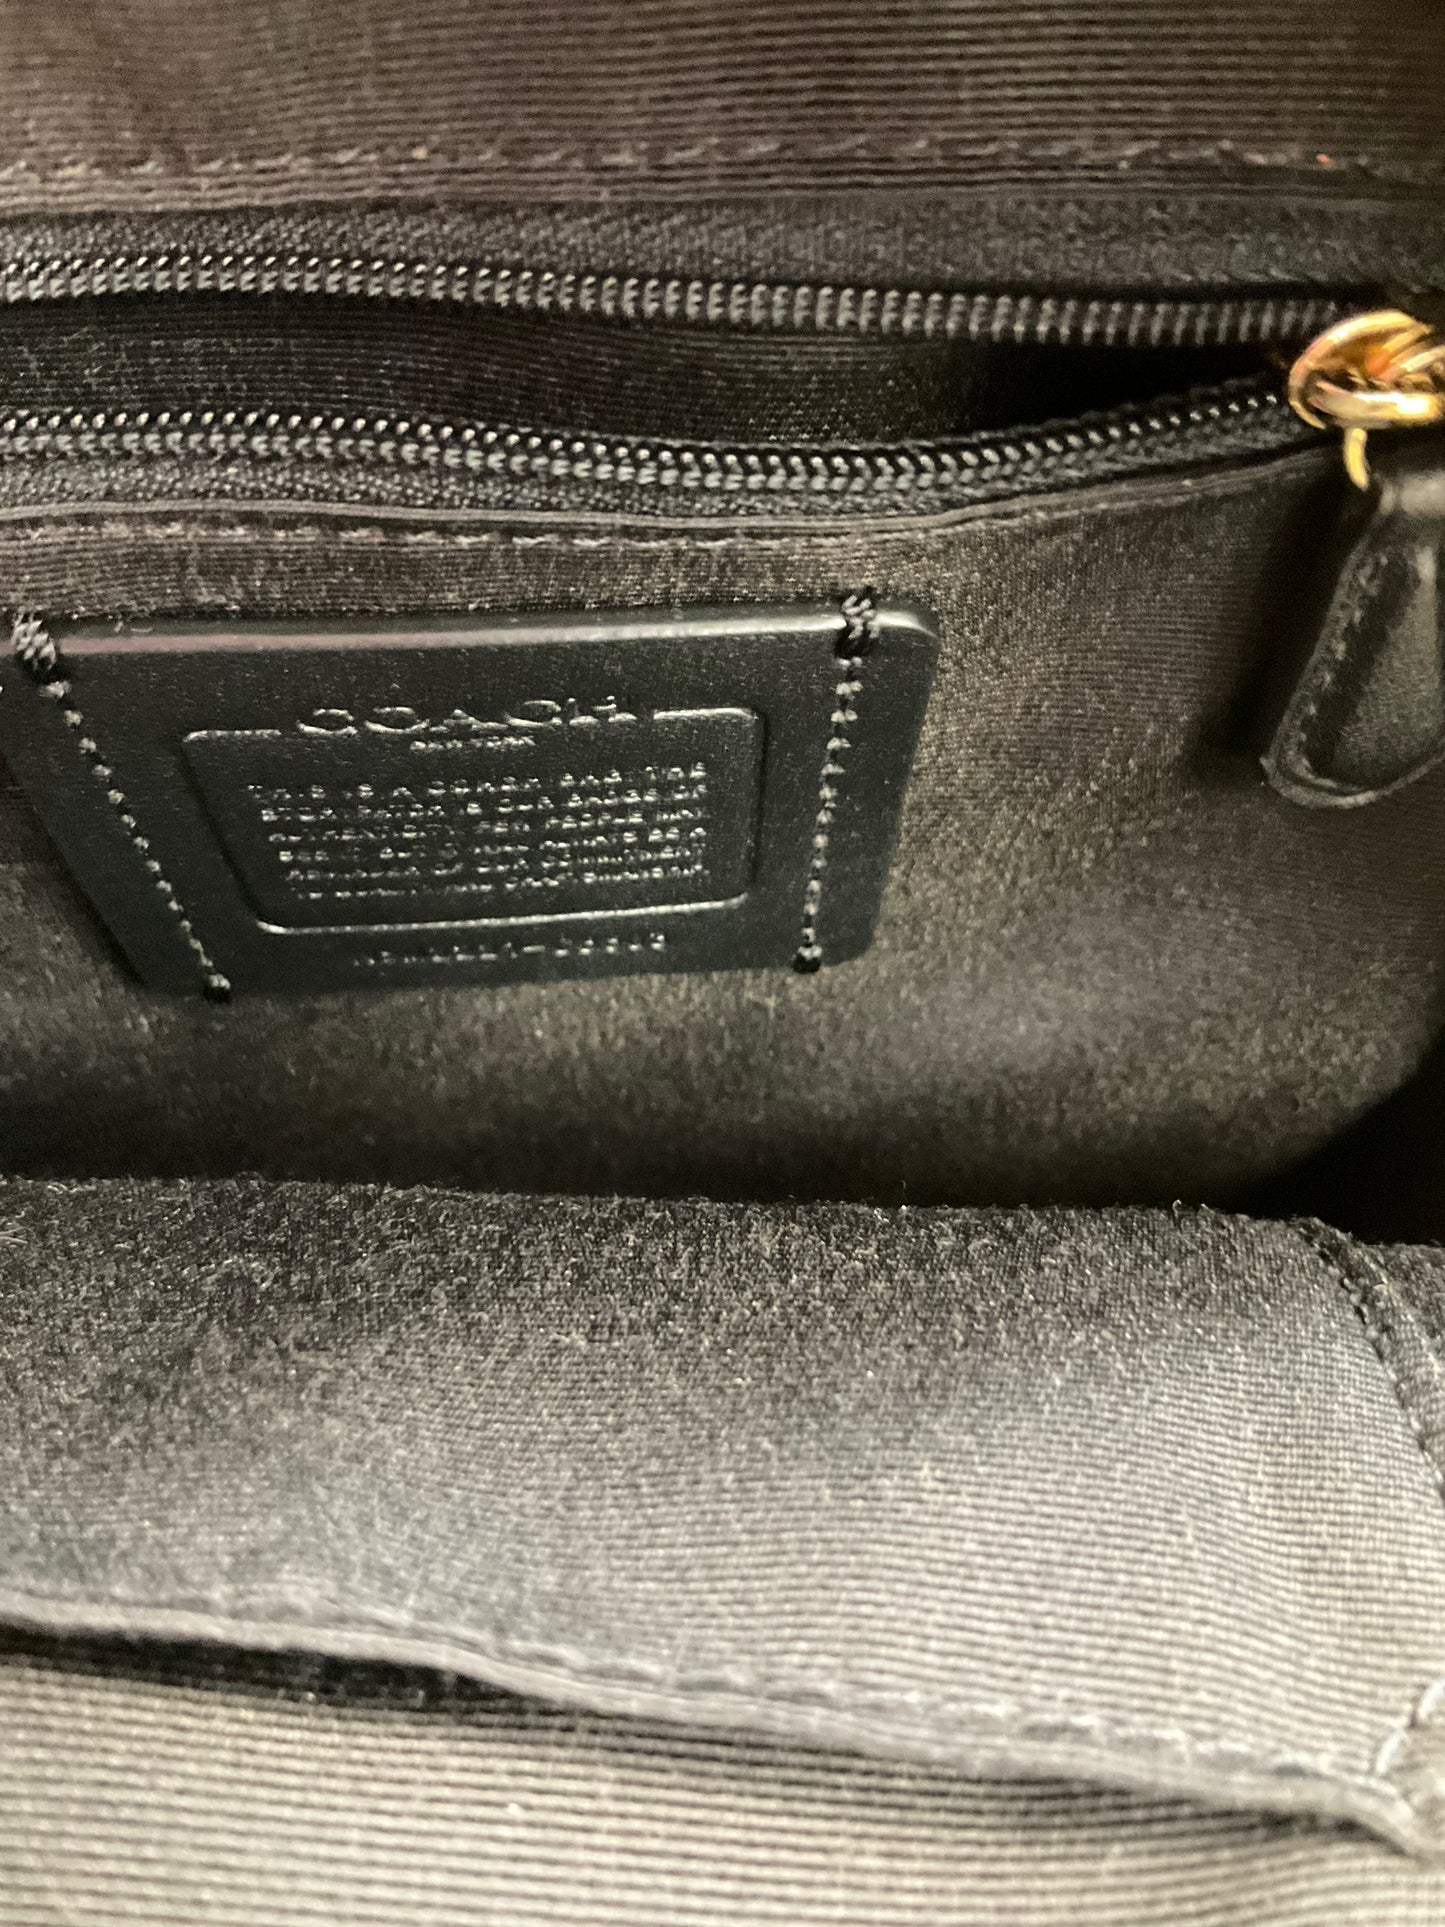 Backpack Leather By Coach  Size: Small